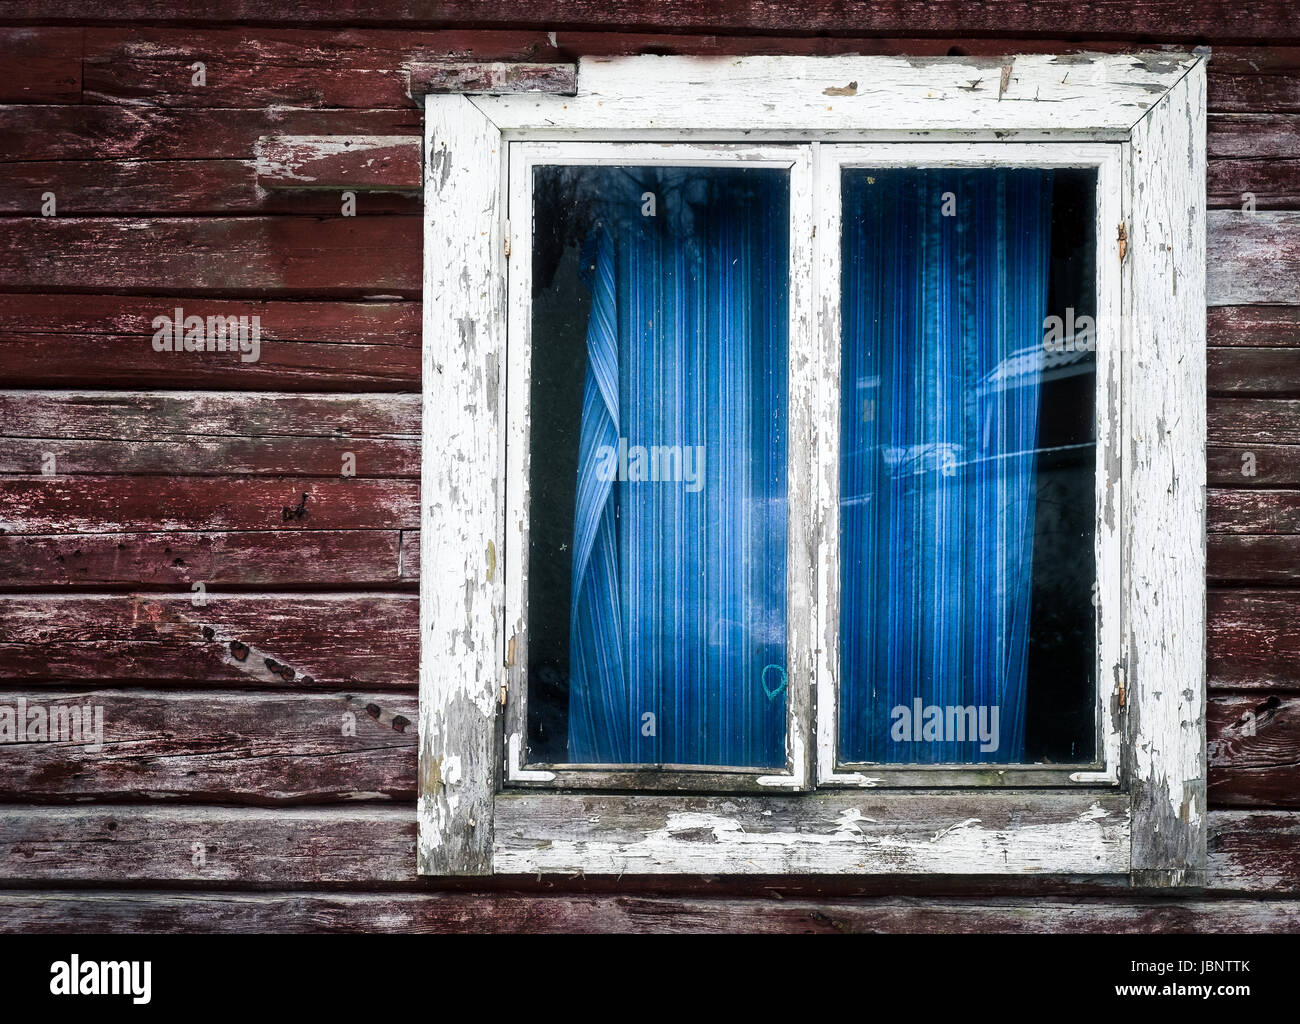 Old and abandoned house with wooden wall and window Stock Photo